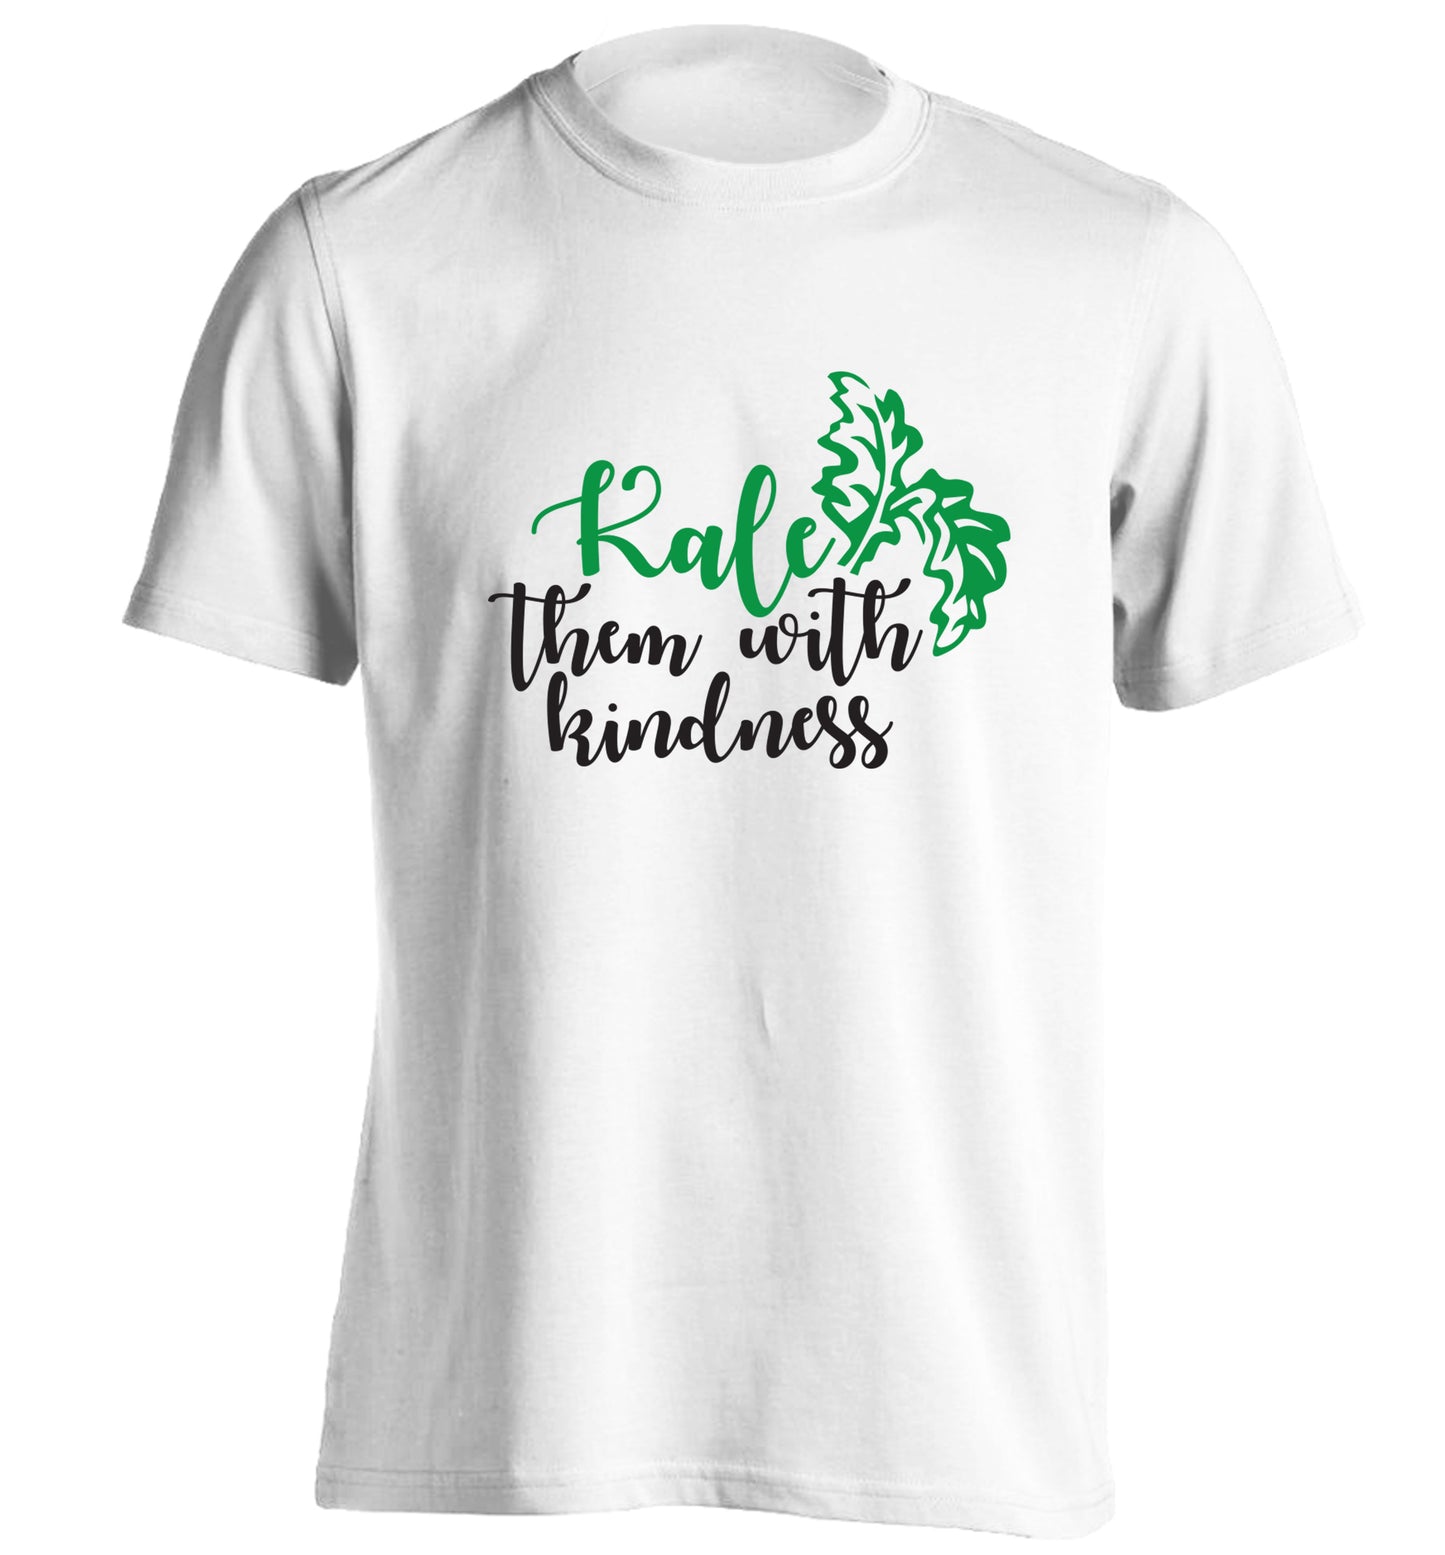 Kale them with kindness adults unisex white Tshirt 2XL